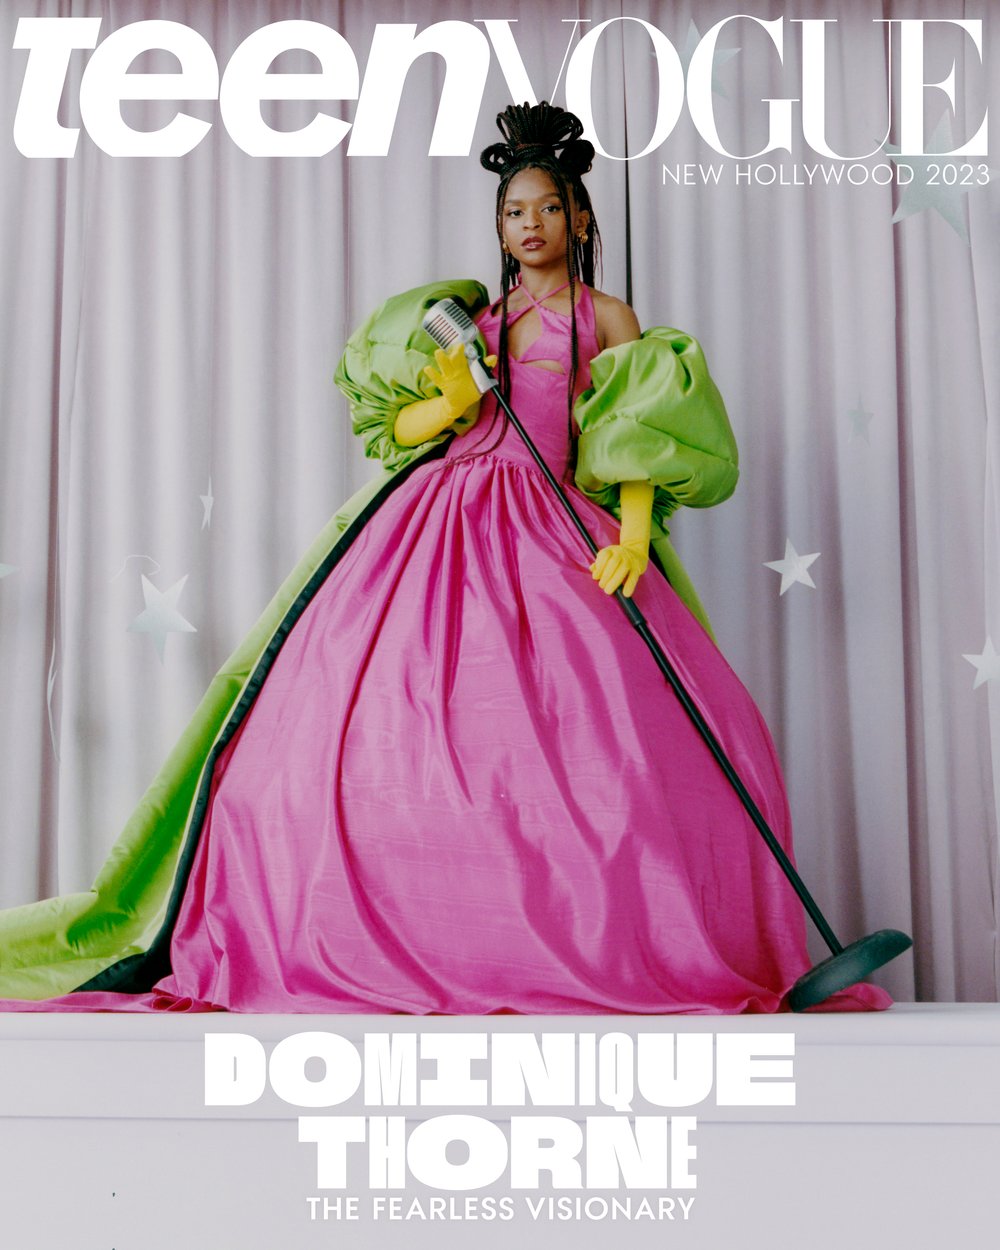 TV_NewHollywood2023_Dominique-Cover - KEITA.jpg